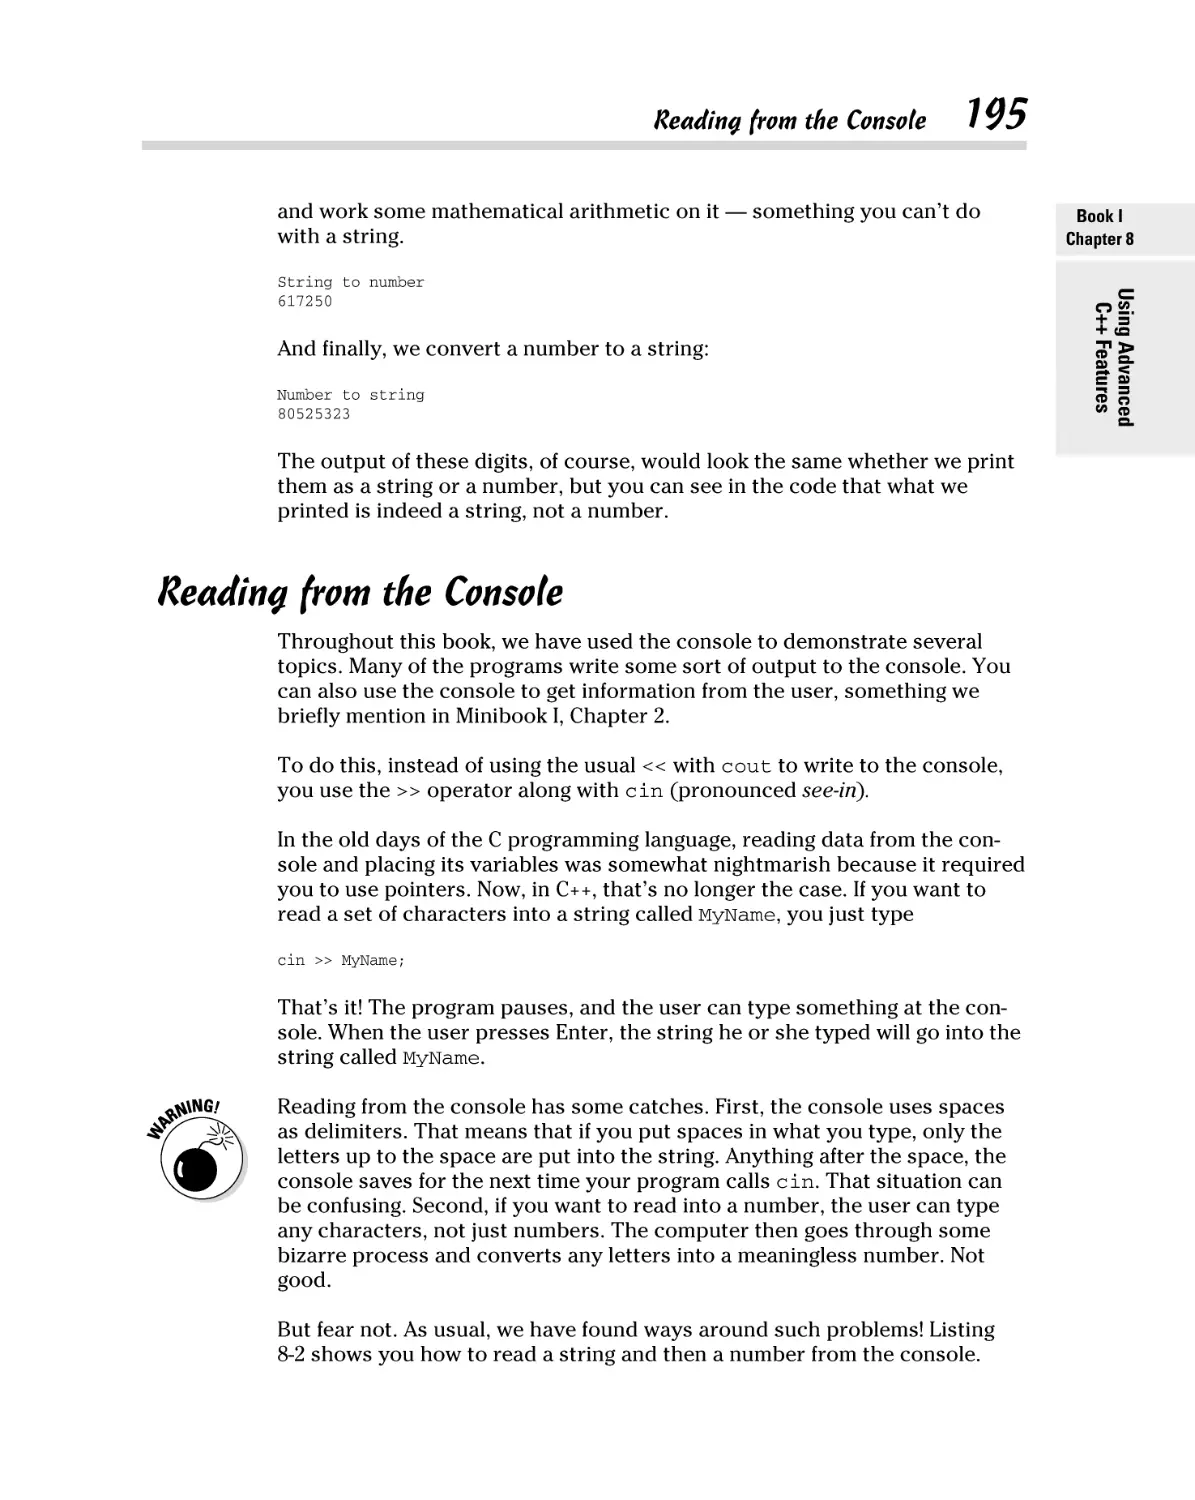 Reading from the Console